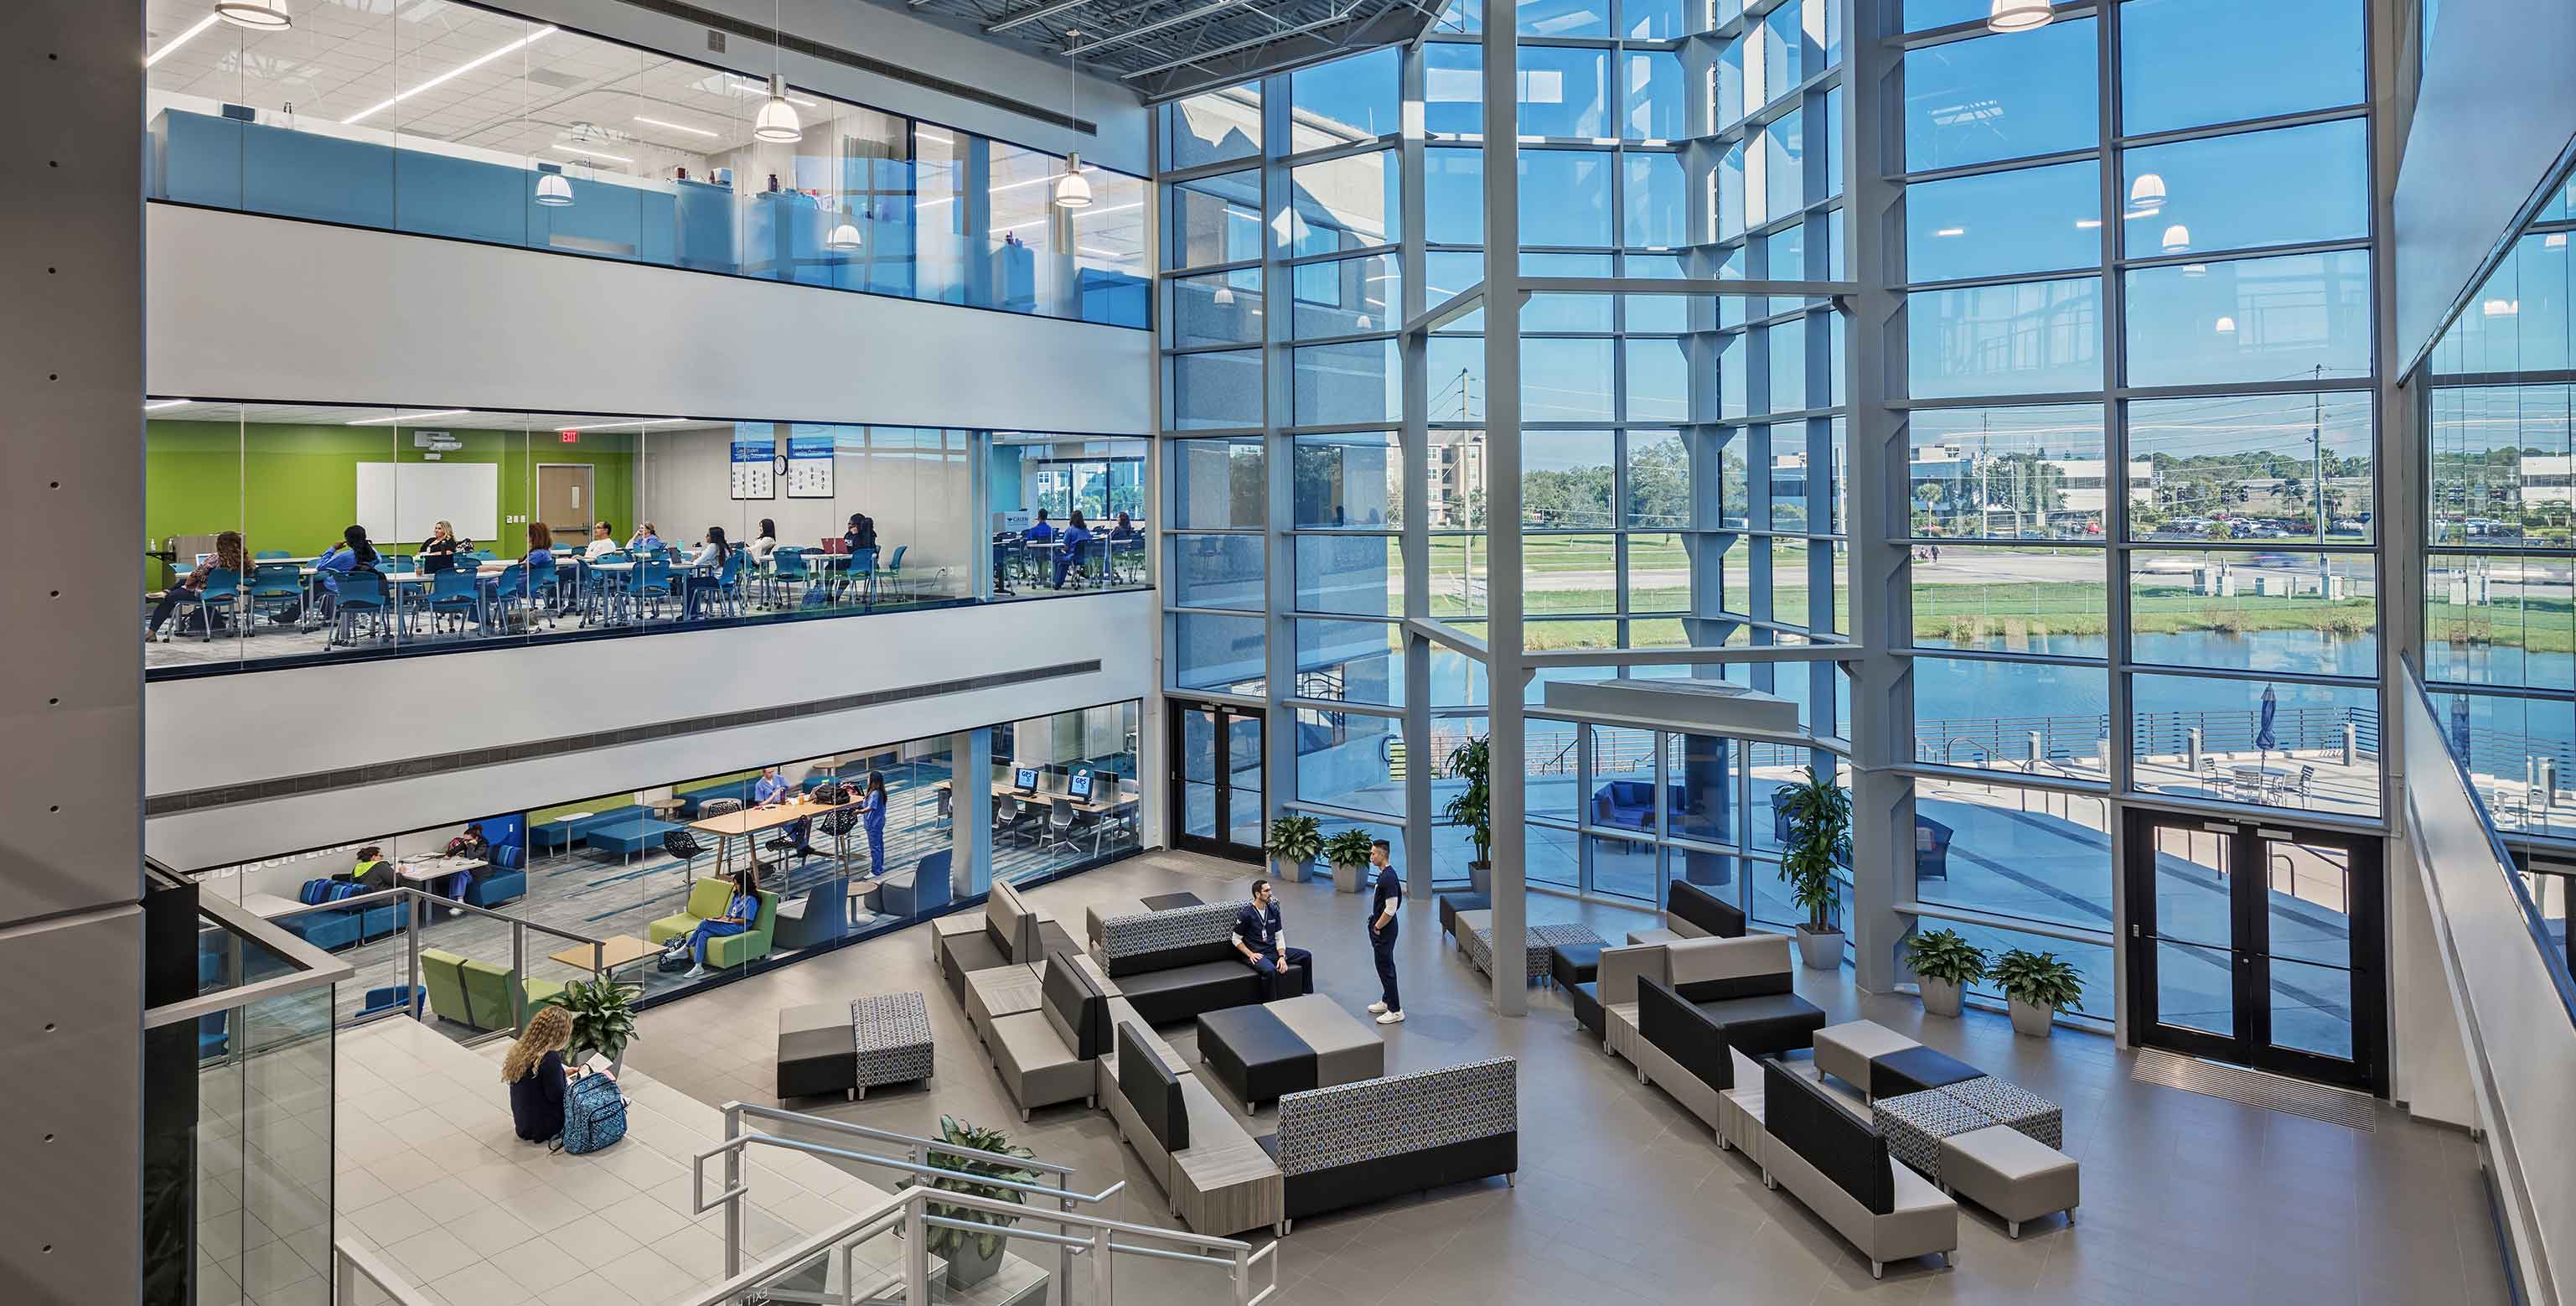 Students at Galen's Tampa facility work on their multiple floors